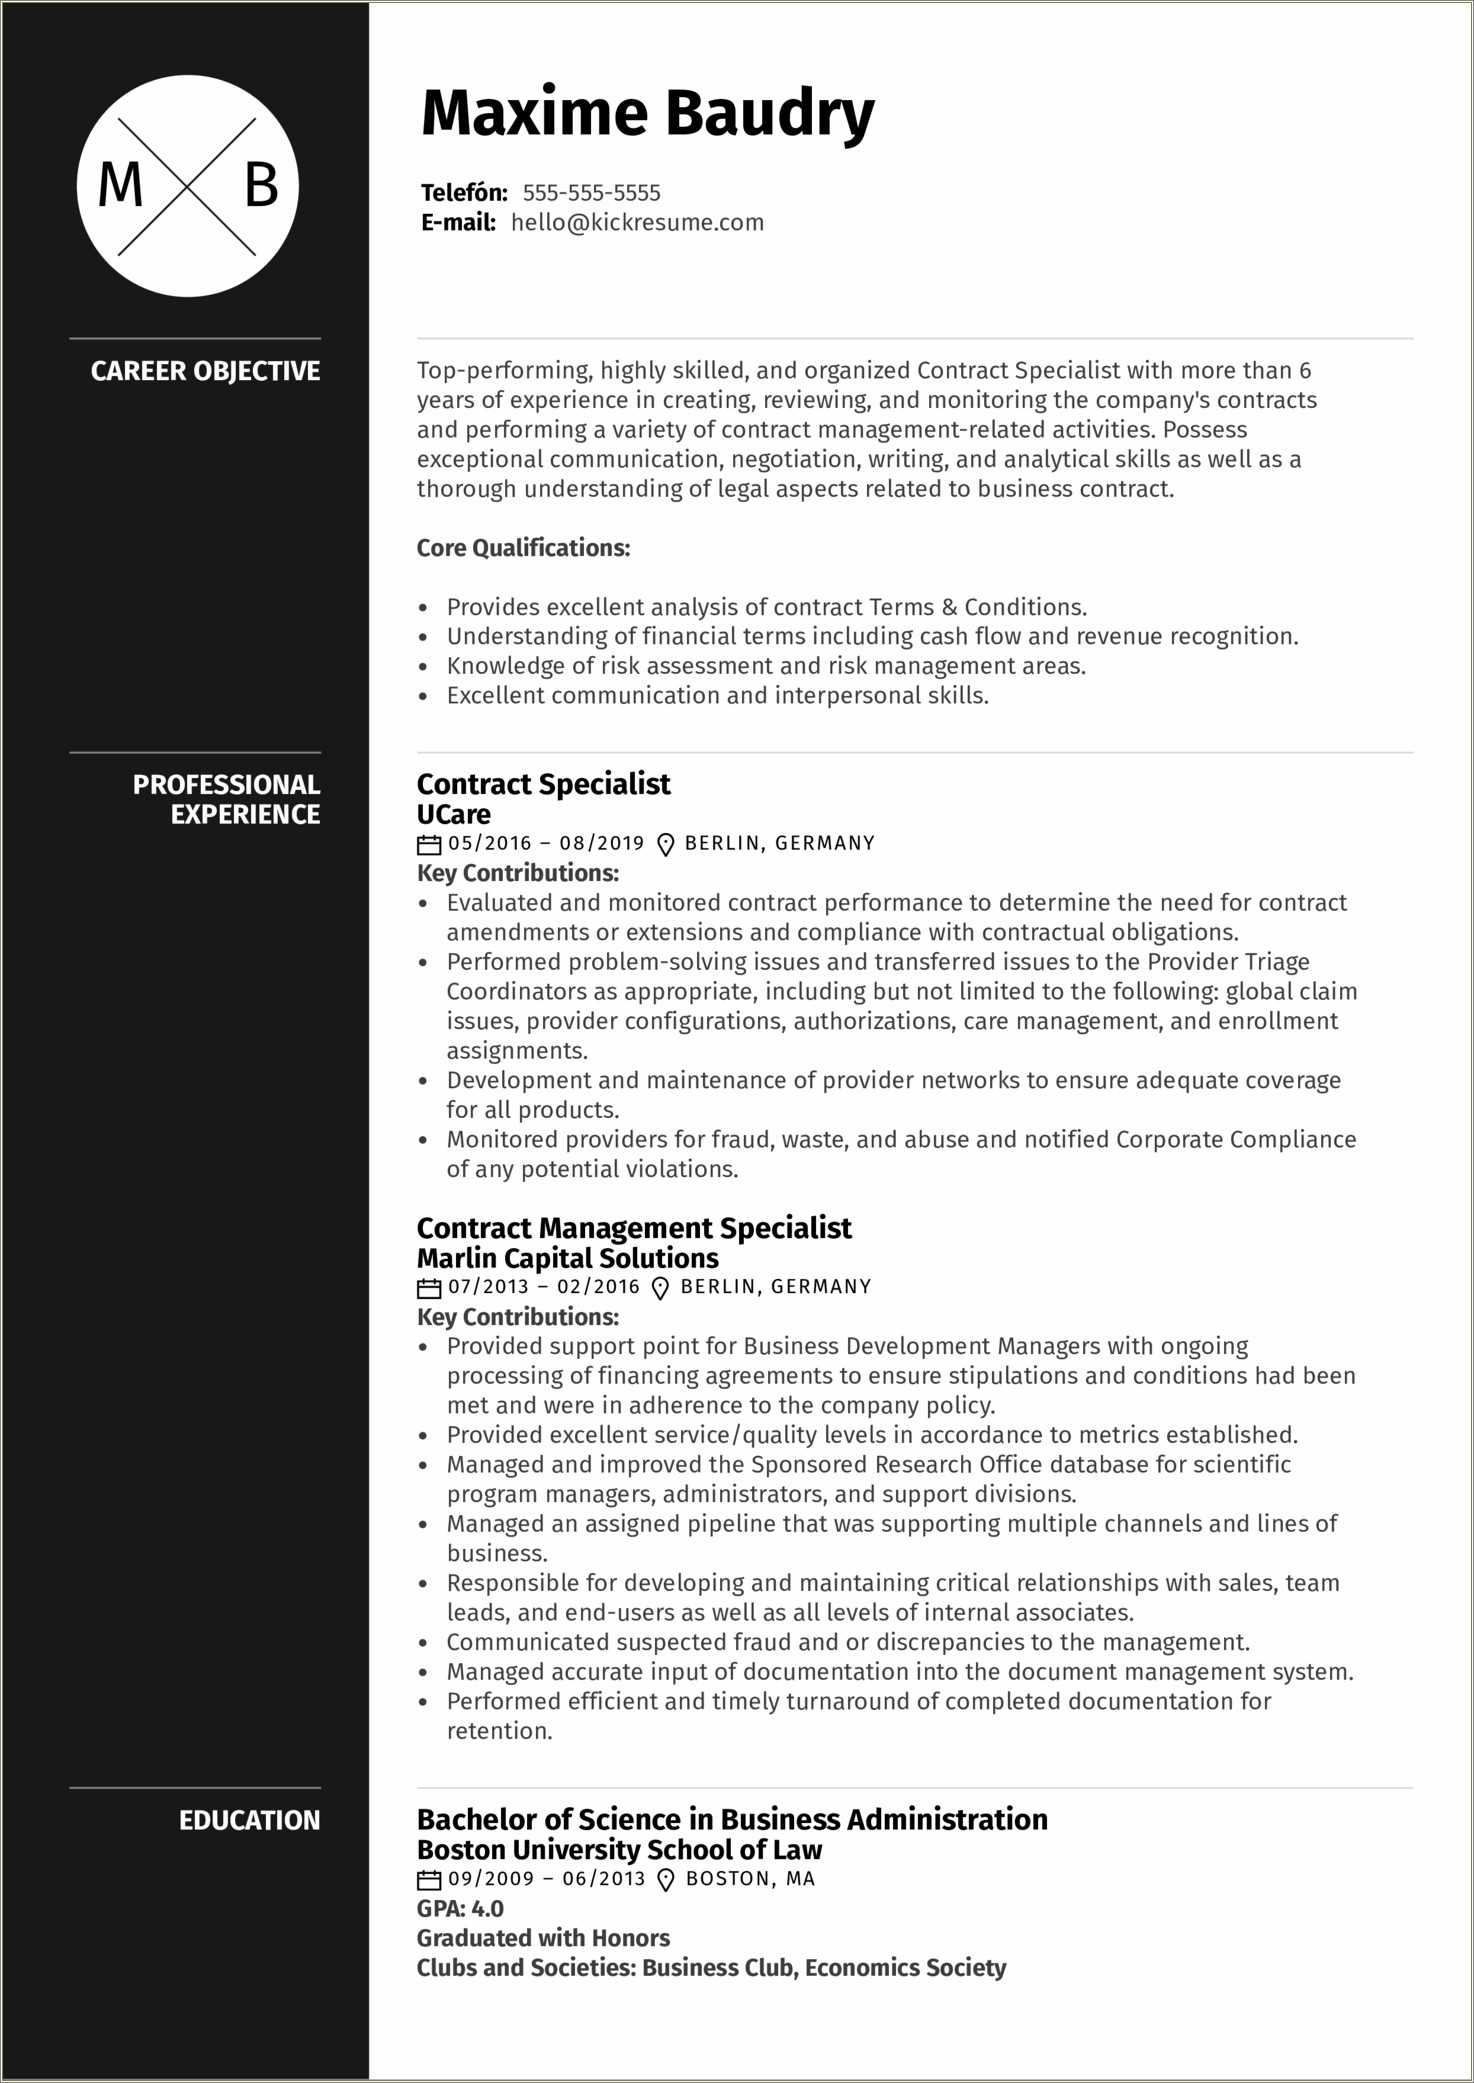 Core Qualifications For Resume Examples 